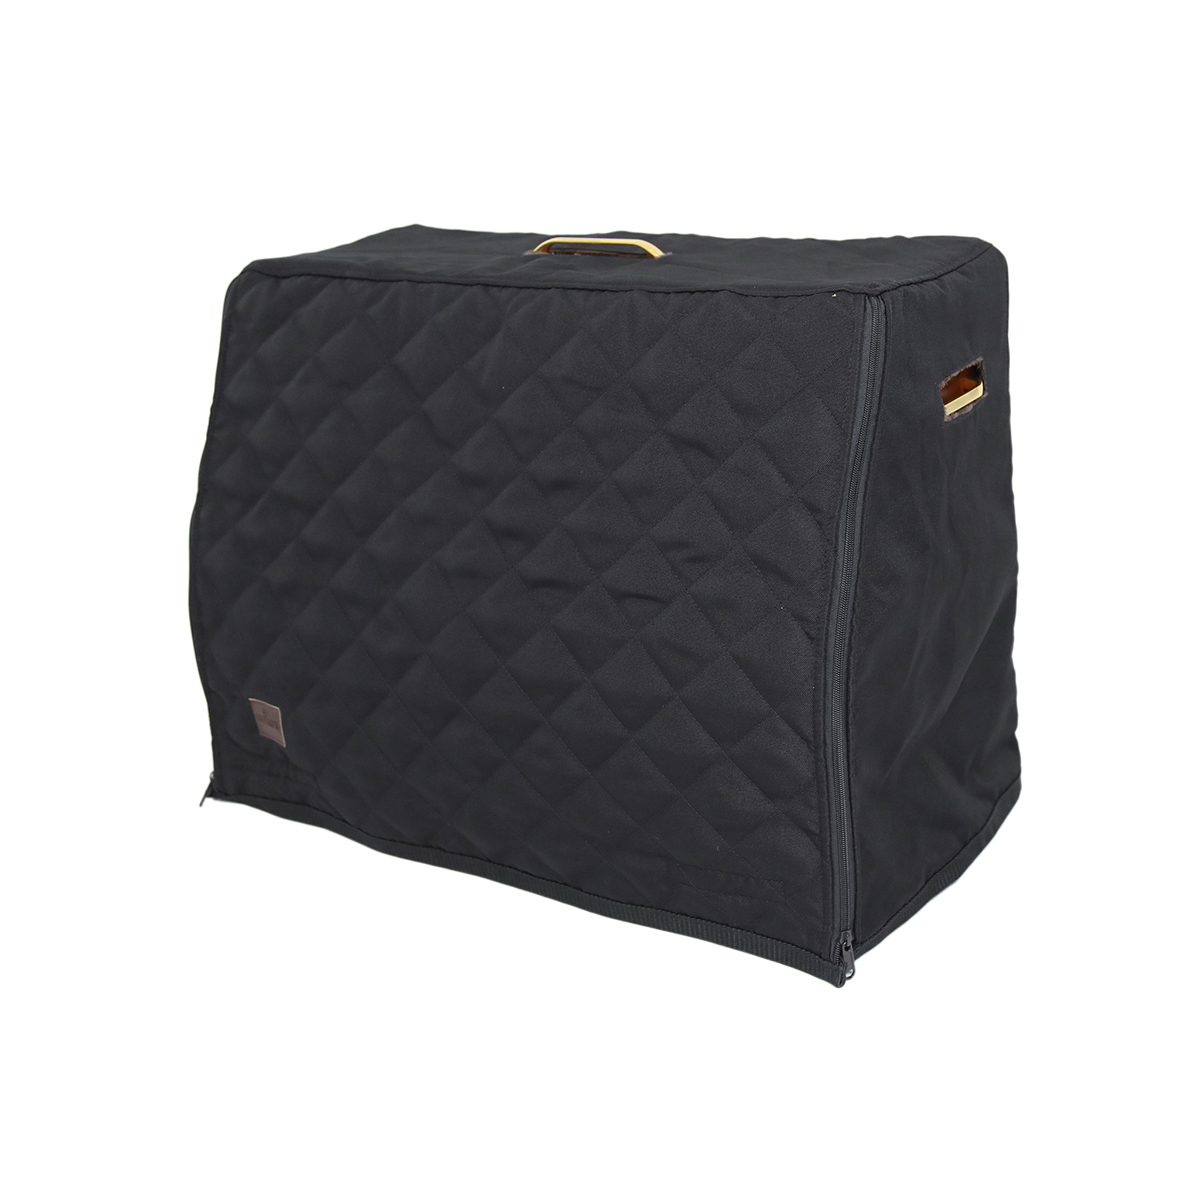 Kentucky Show Grooming Box Cover - Color : Black